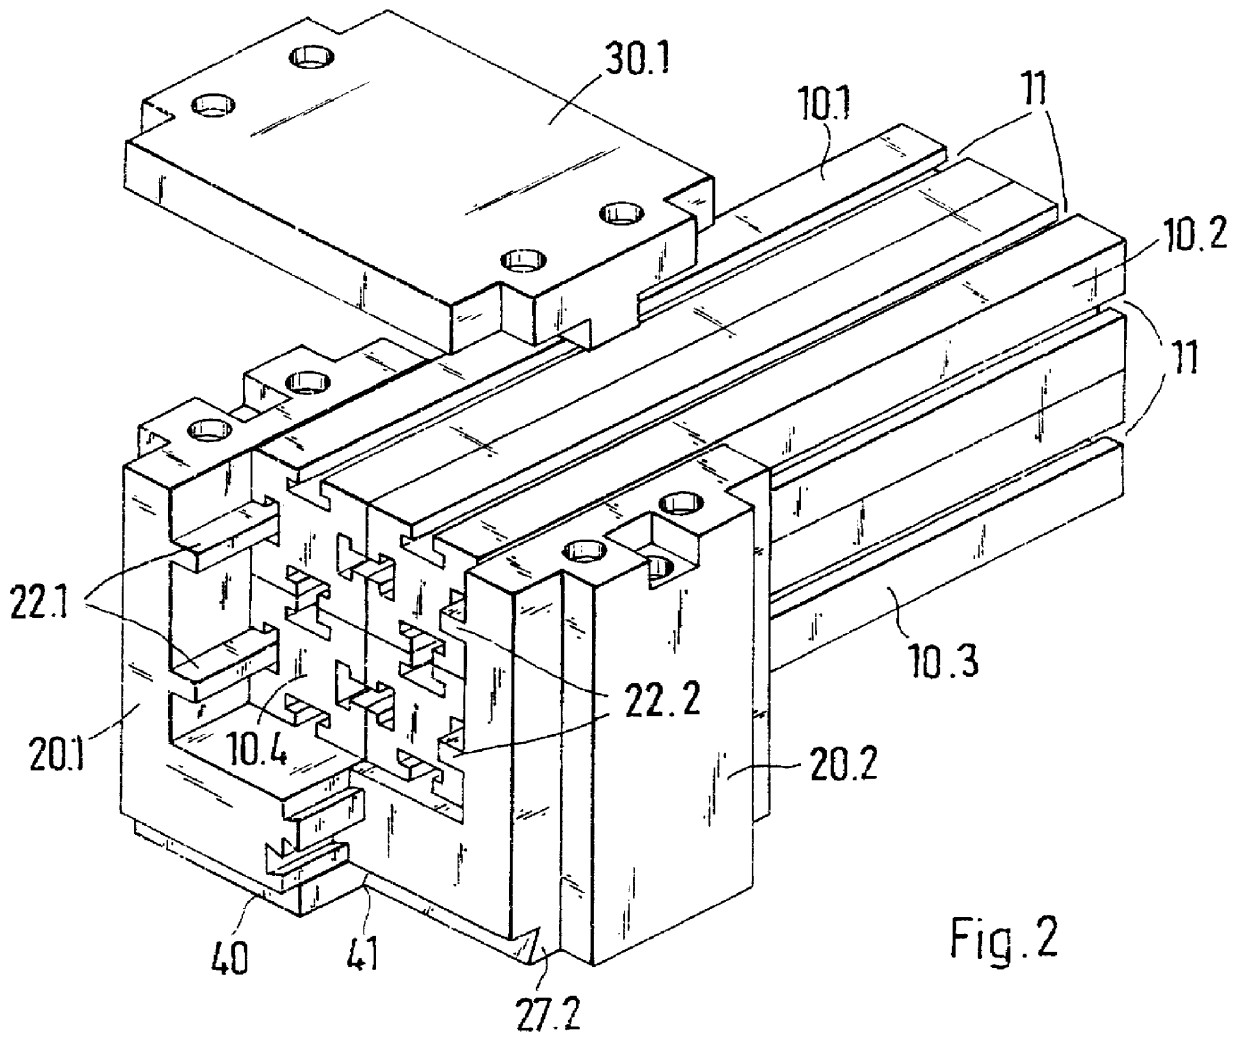 Support for busbars of a busbar system